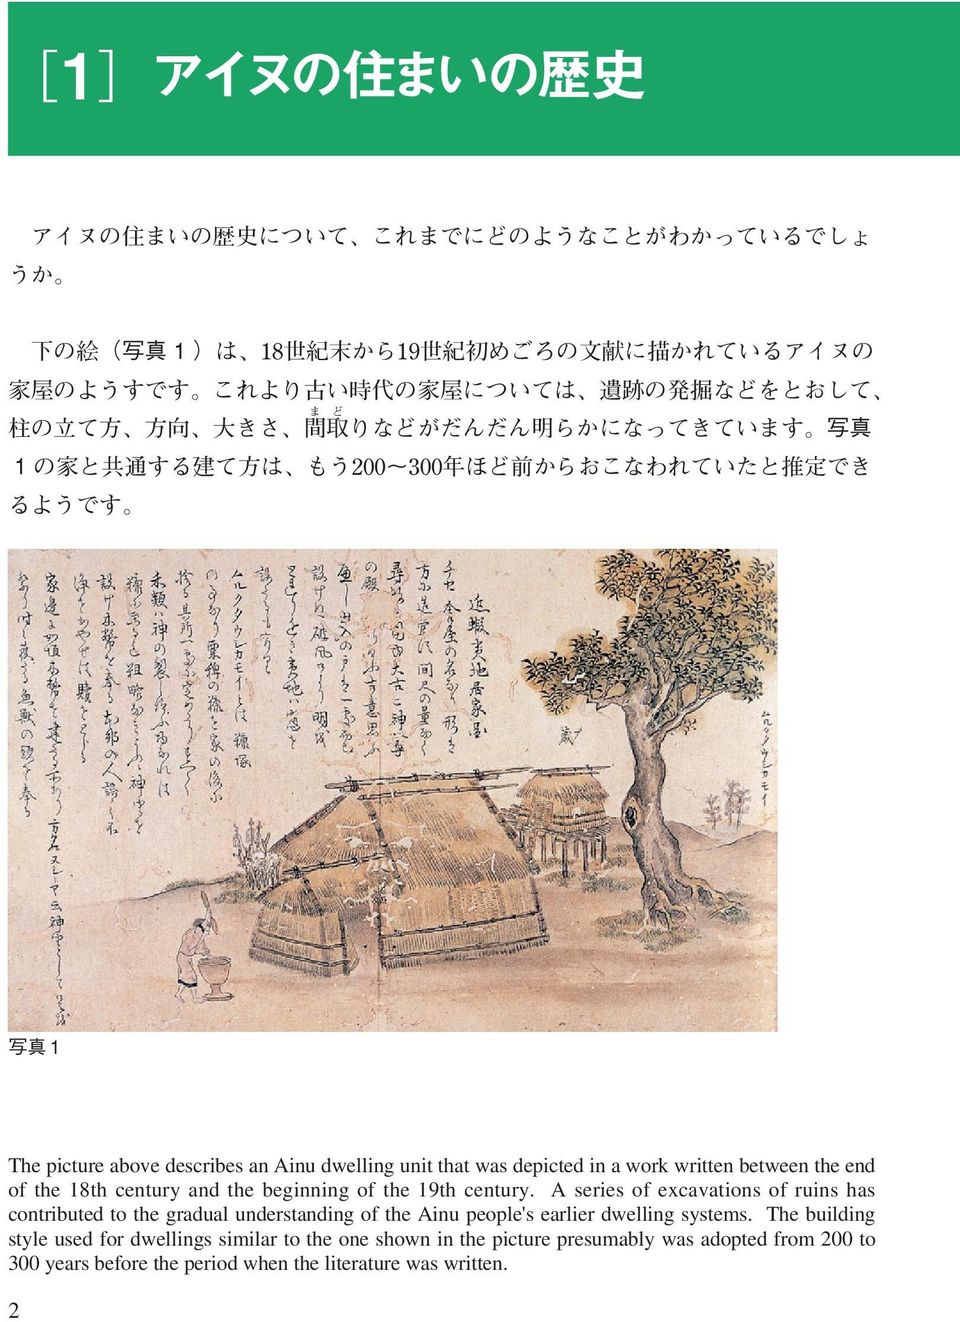 A series of excavations of ruins has contributed to the gradual understanding of the Ainu people's earlier dwelling